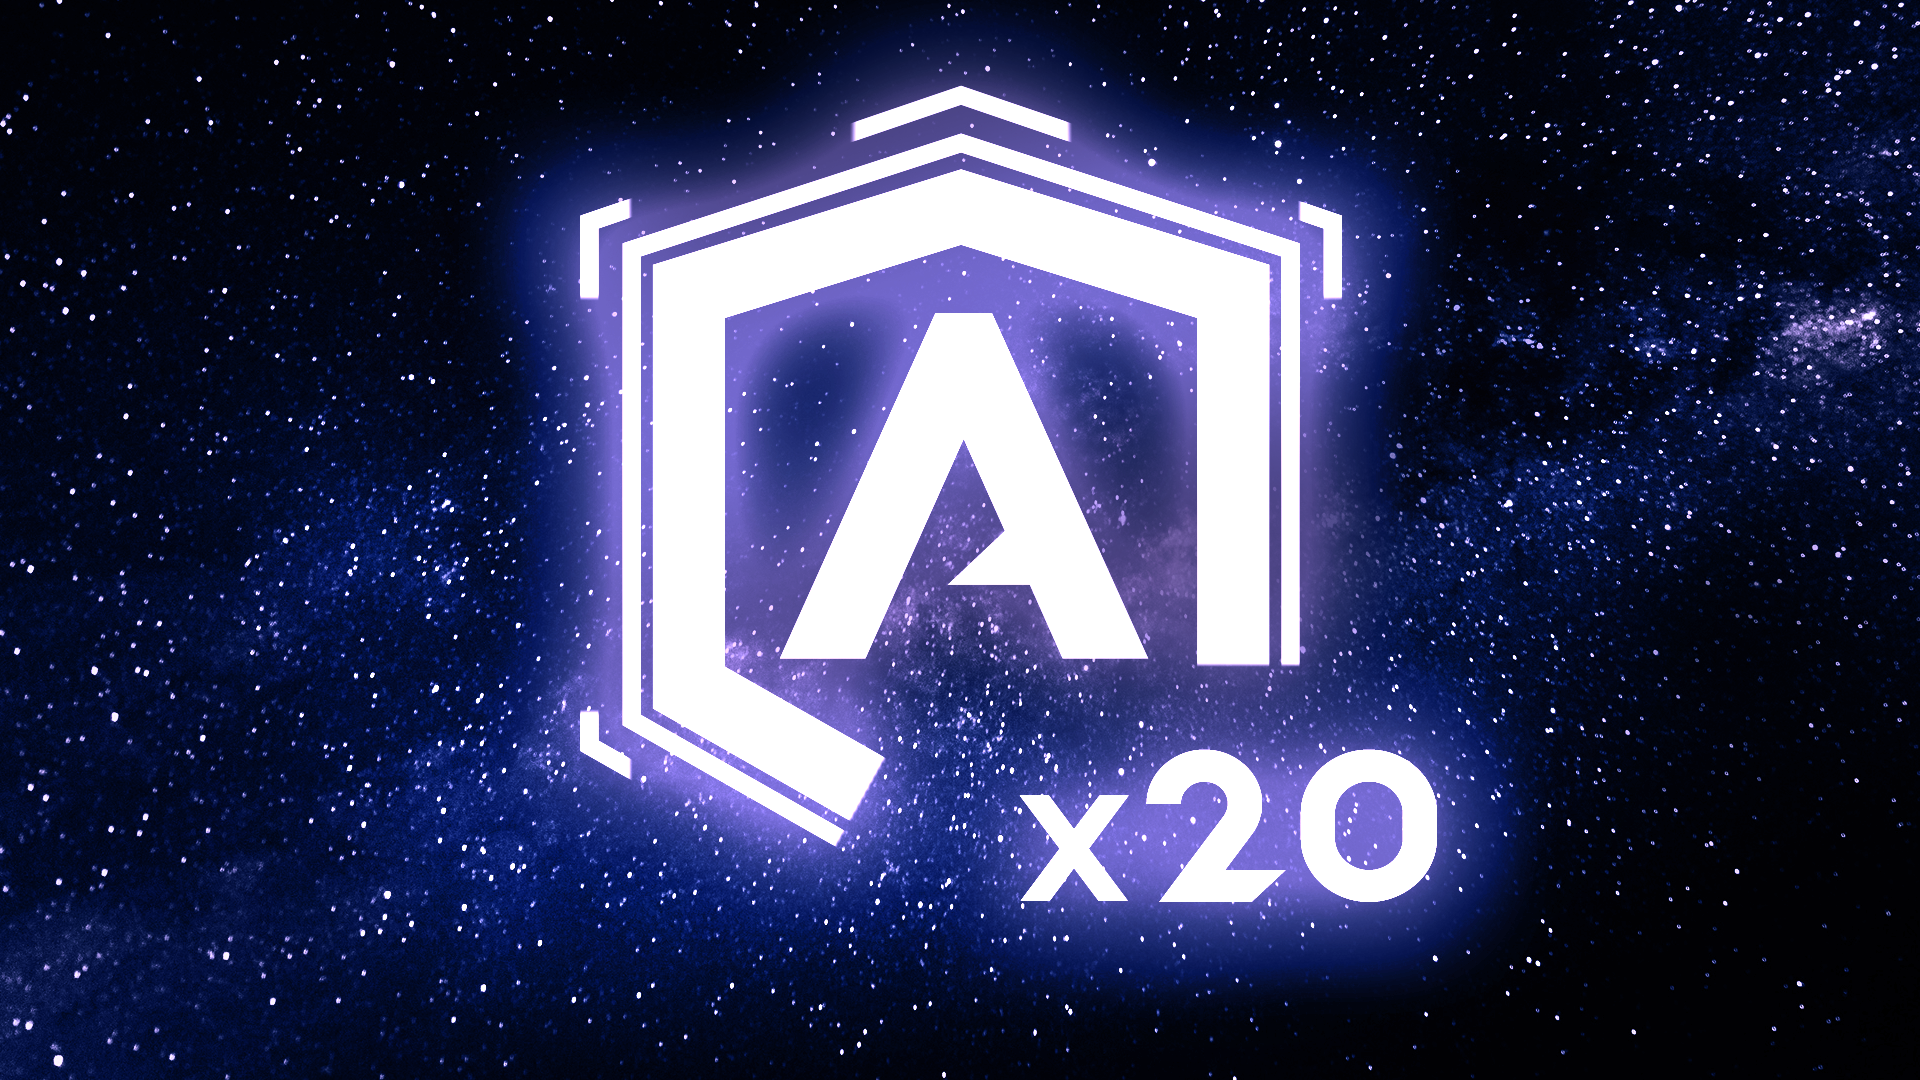 Icon for Triple A